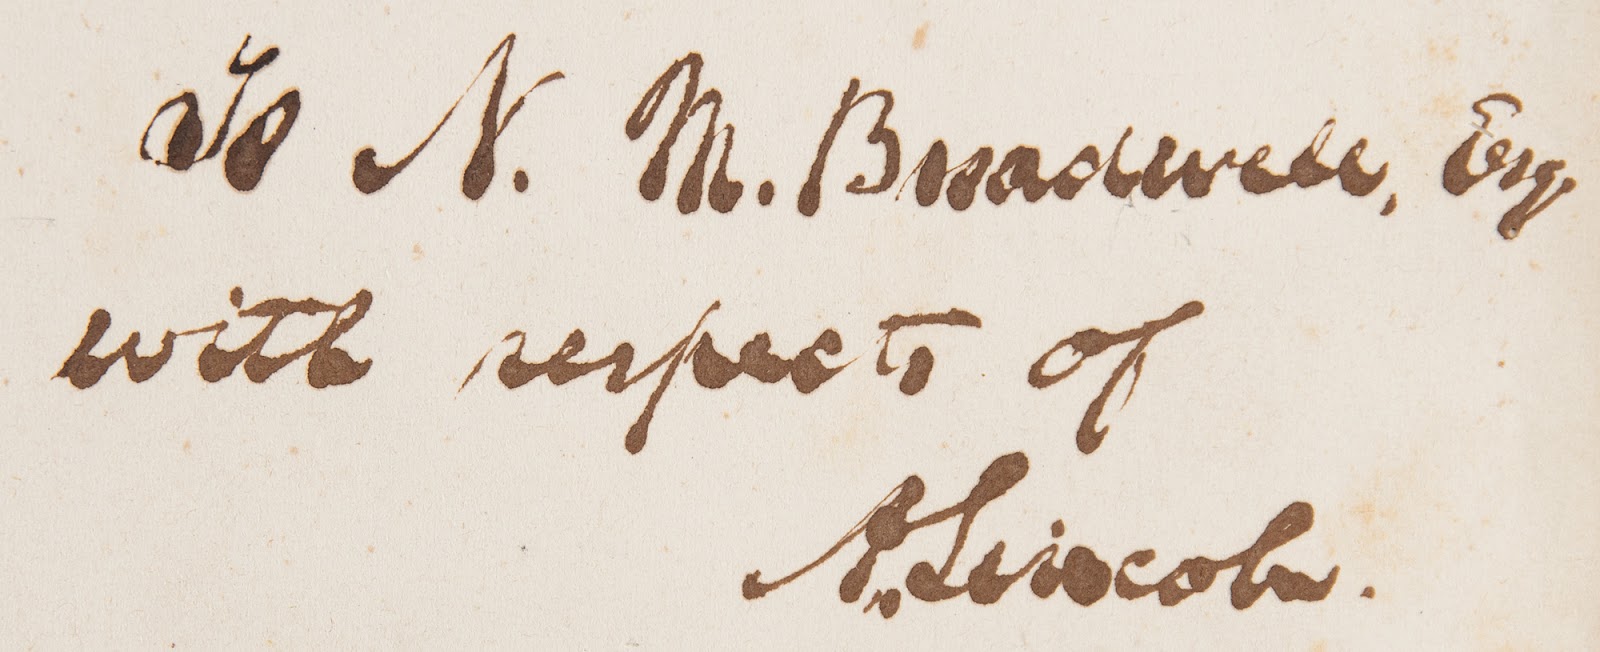 Lincoln’s inscription and signature written in ink, “To N. M. Broadwell, Esq., with respects of A. Lincoln.” Broadwell studied law as a preceptor under Lincoln beginning in 1852.